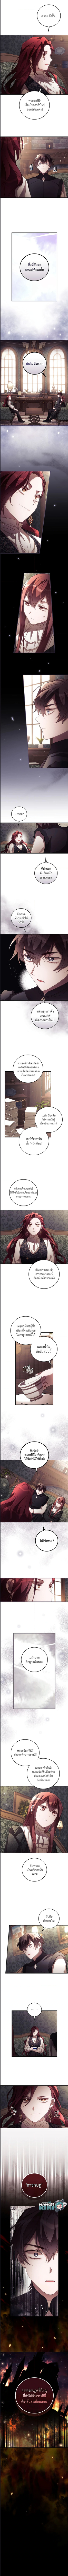 I Can See Your Death เธ•เธญเธเธ—เธตเน 46 (3)